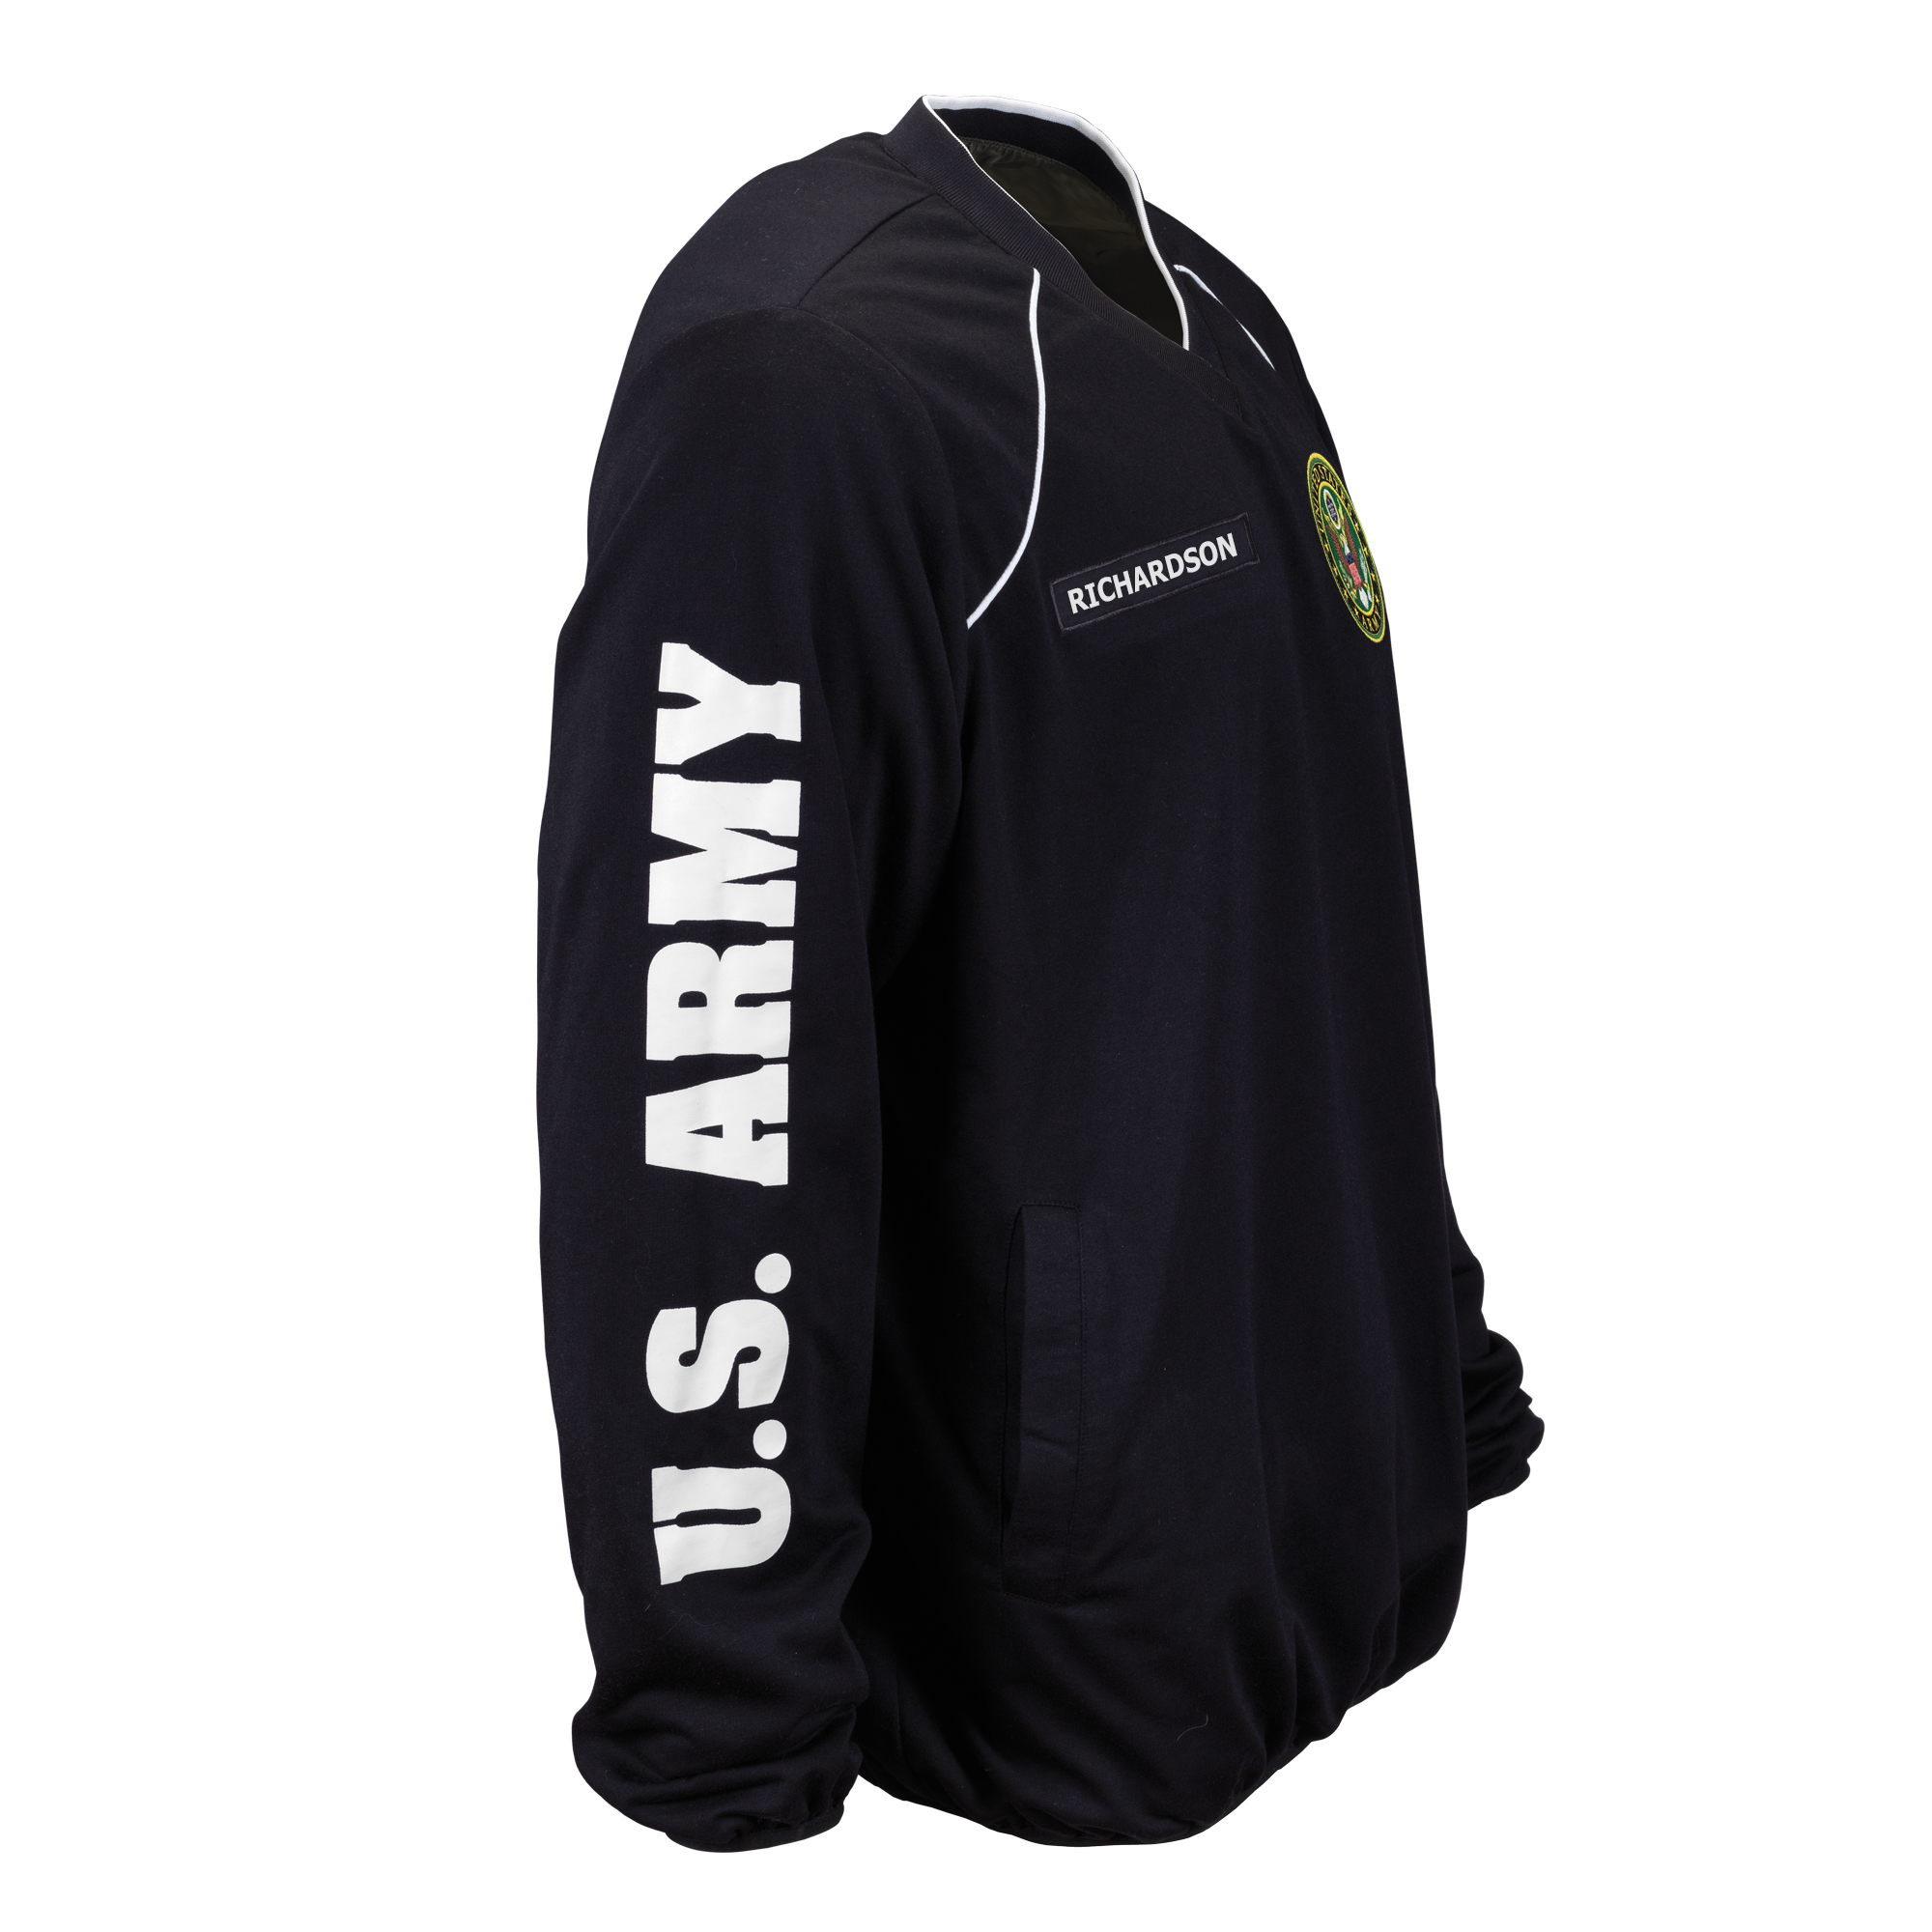 The Personalized US Army Pullover 10159 0016 a main